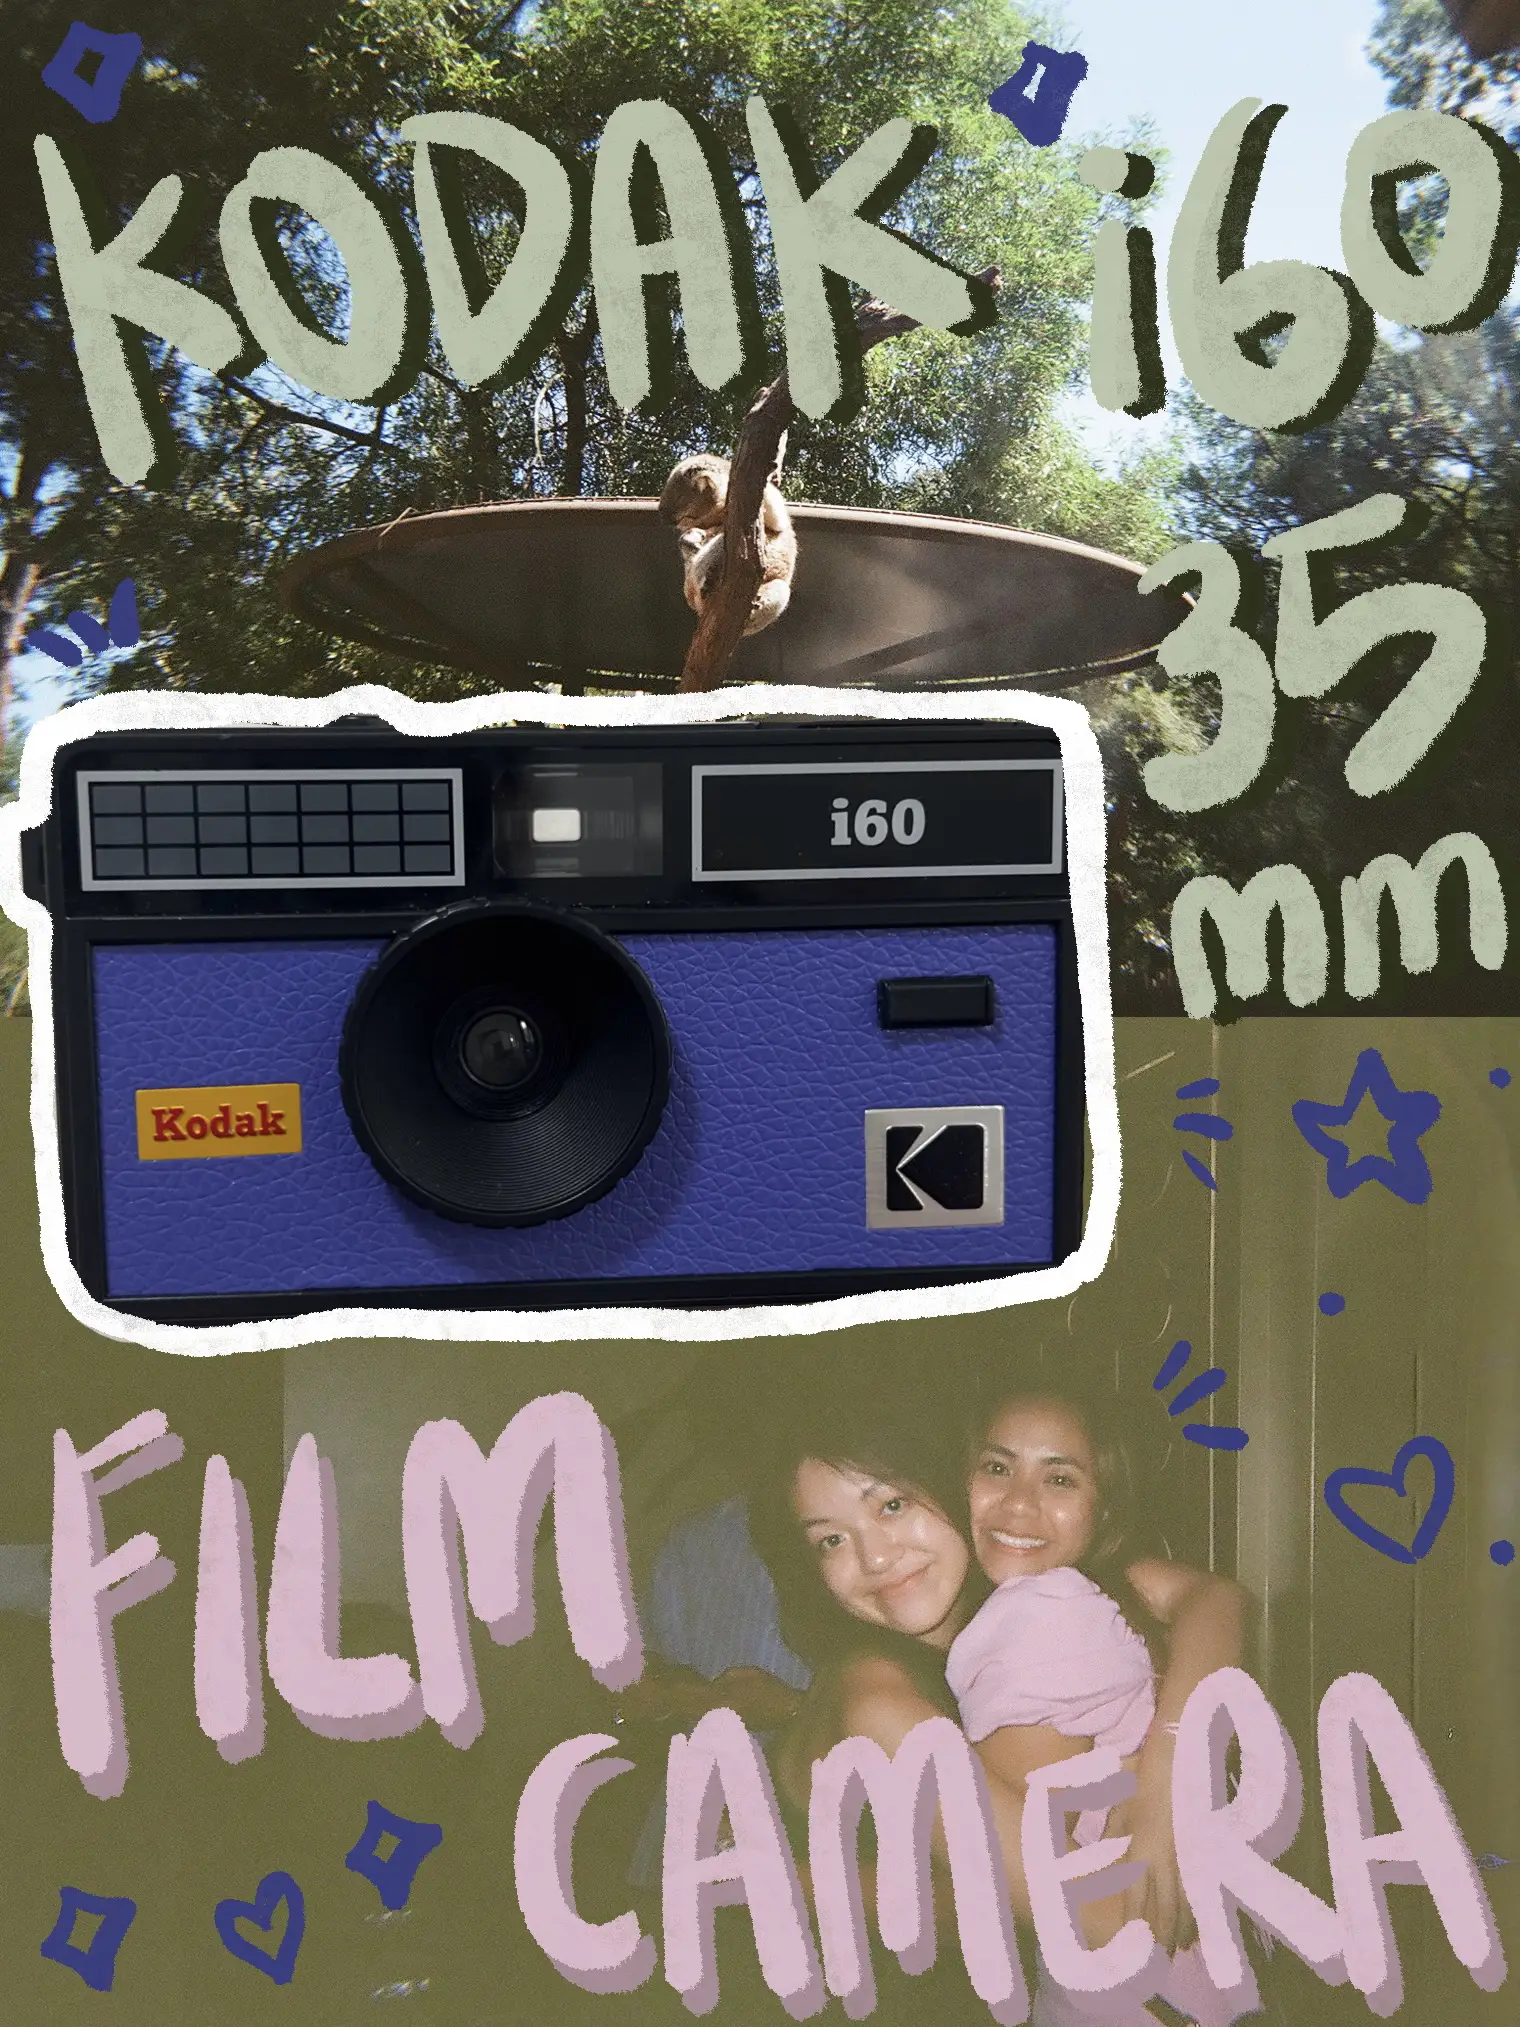 I have Kodak film reel cameras with me. What should I do with them